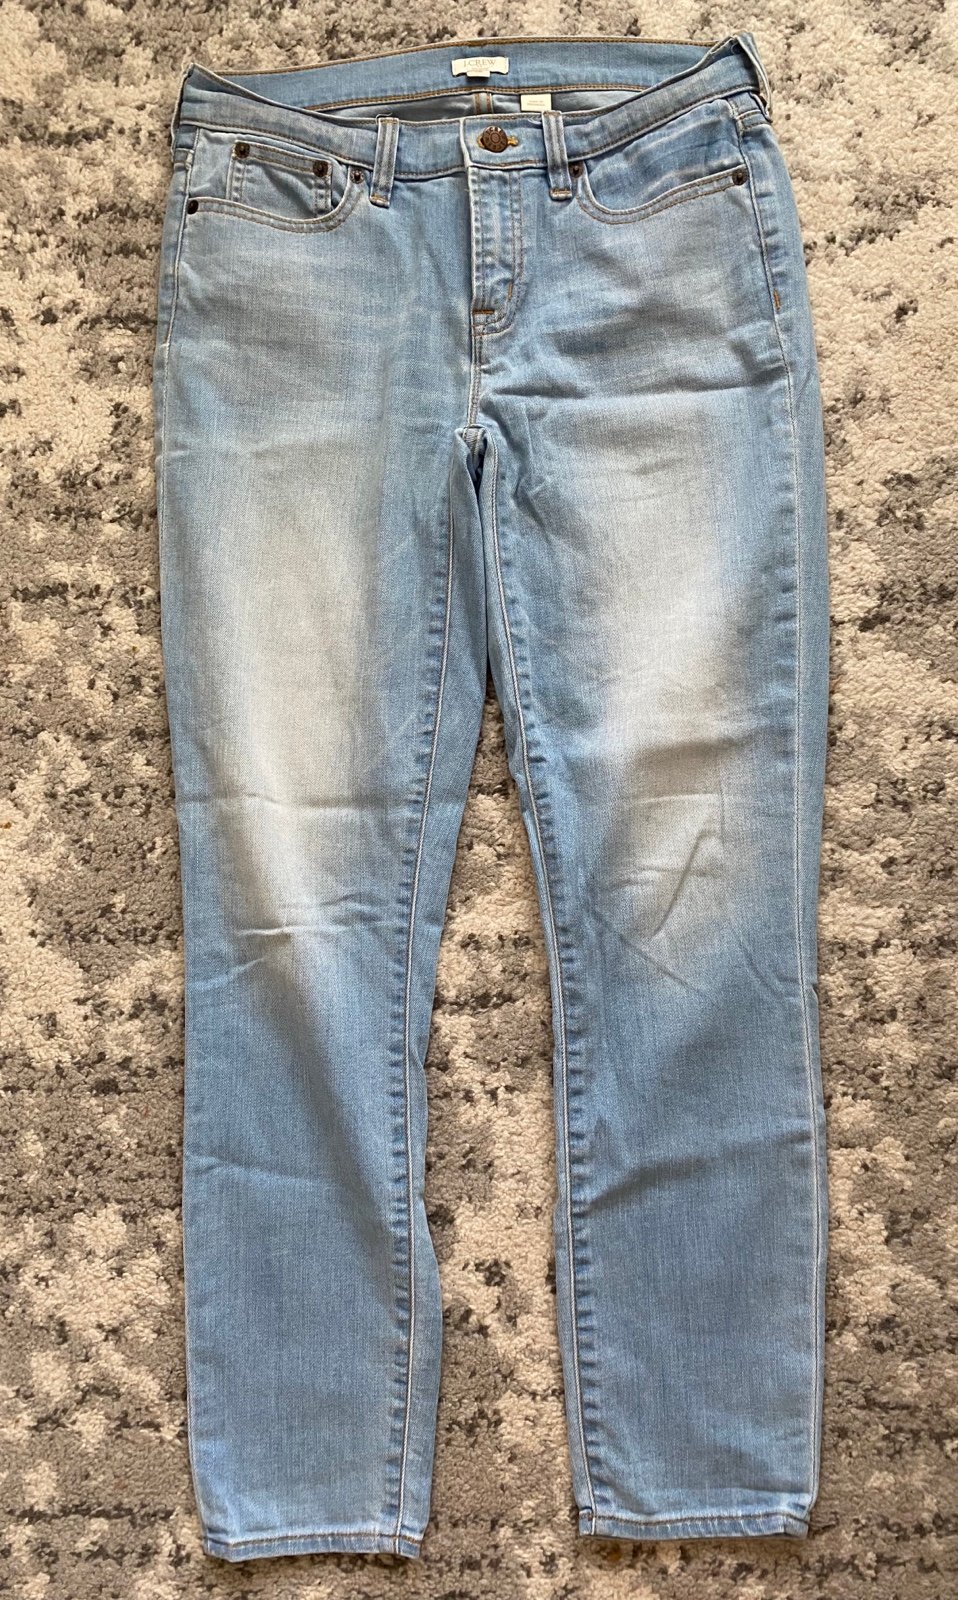 Personality Jcrew Stretch Jeans hocK5xyMq US Outlet